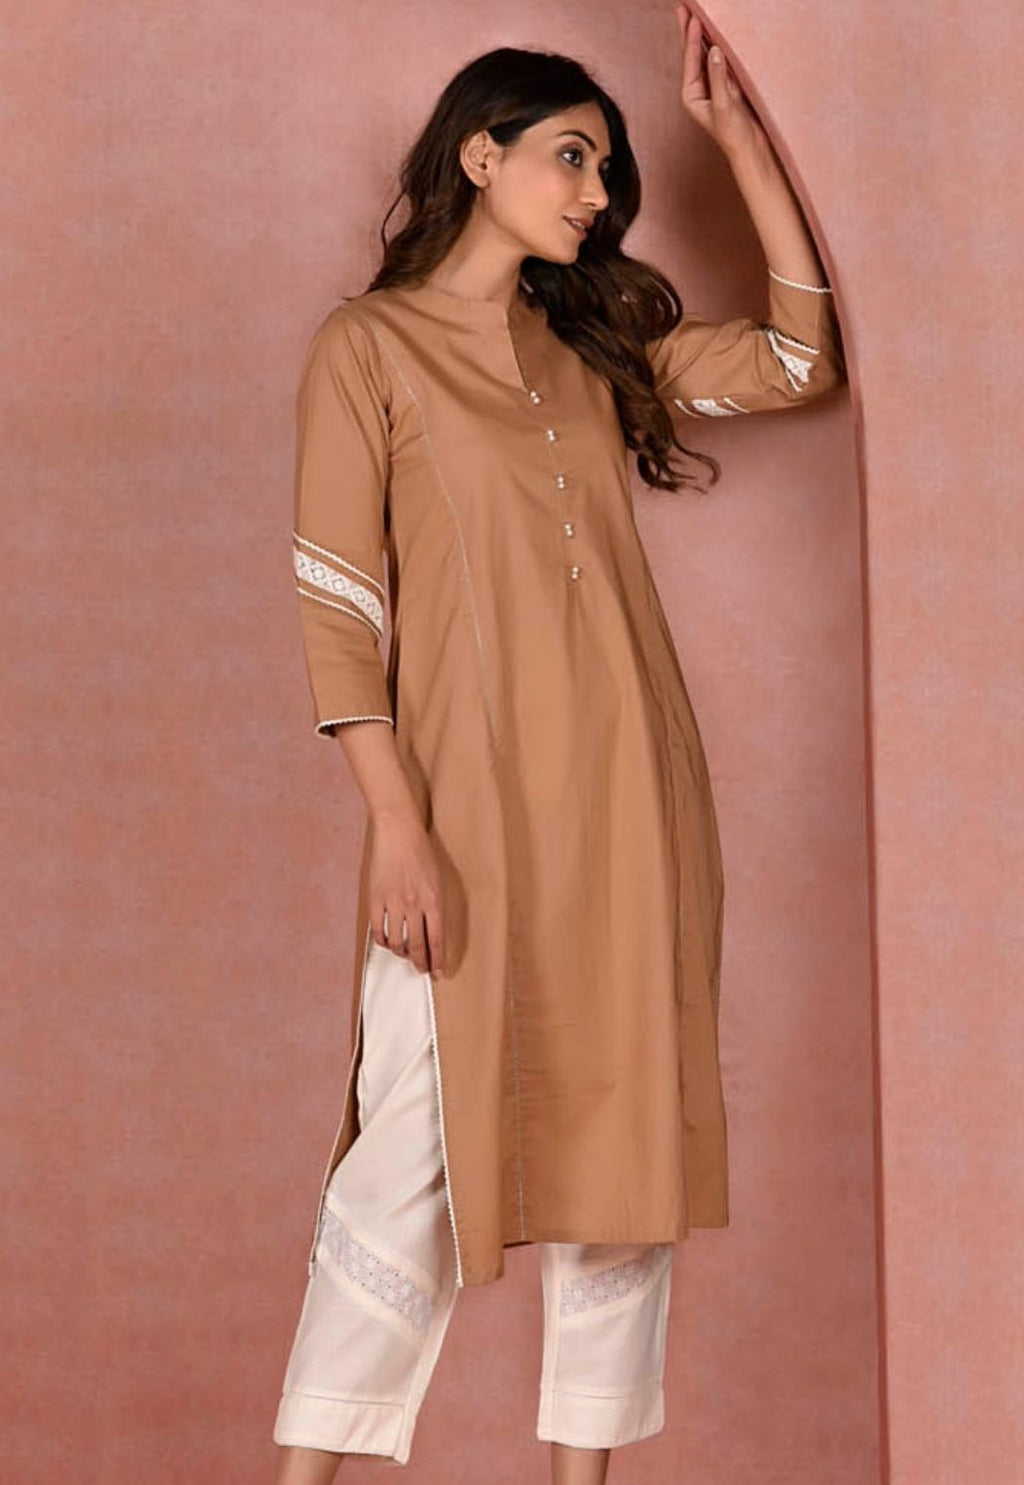 Beige Kurta with Lace Details Paired With White Pants